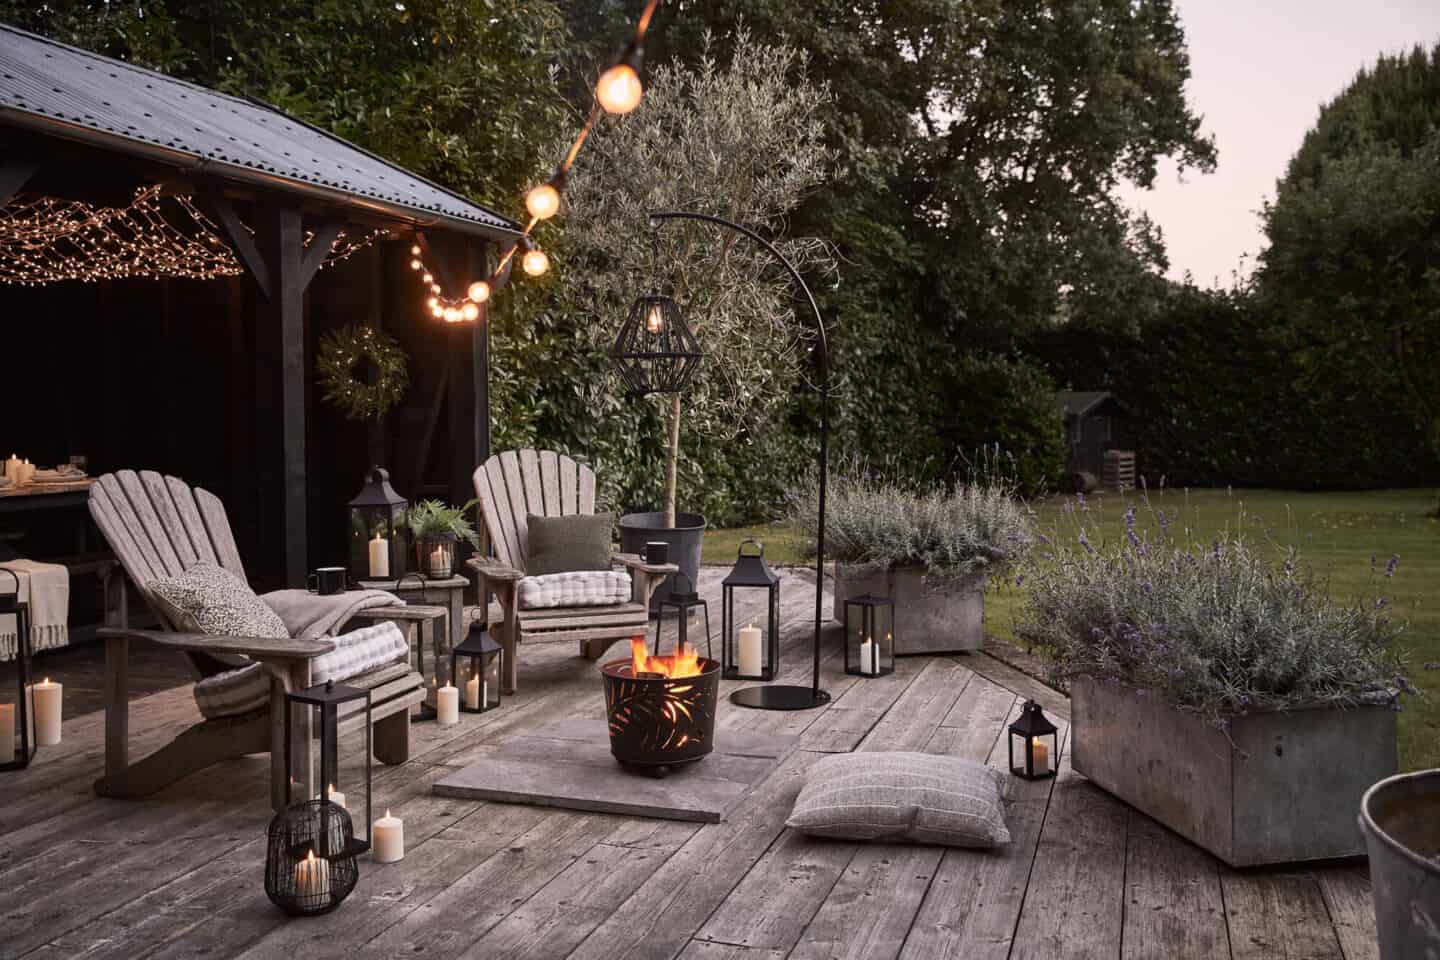 A decked area featuring wooden chairs a fire bucket and lots of lanterns, festoon lights and fairy lights.